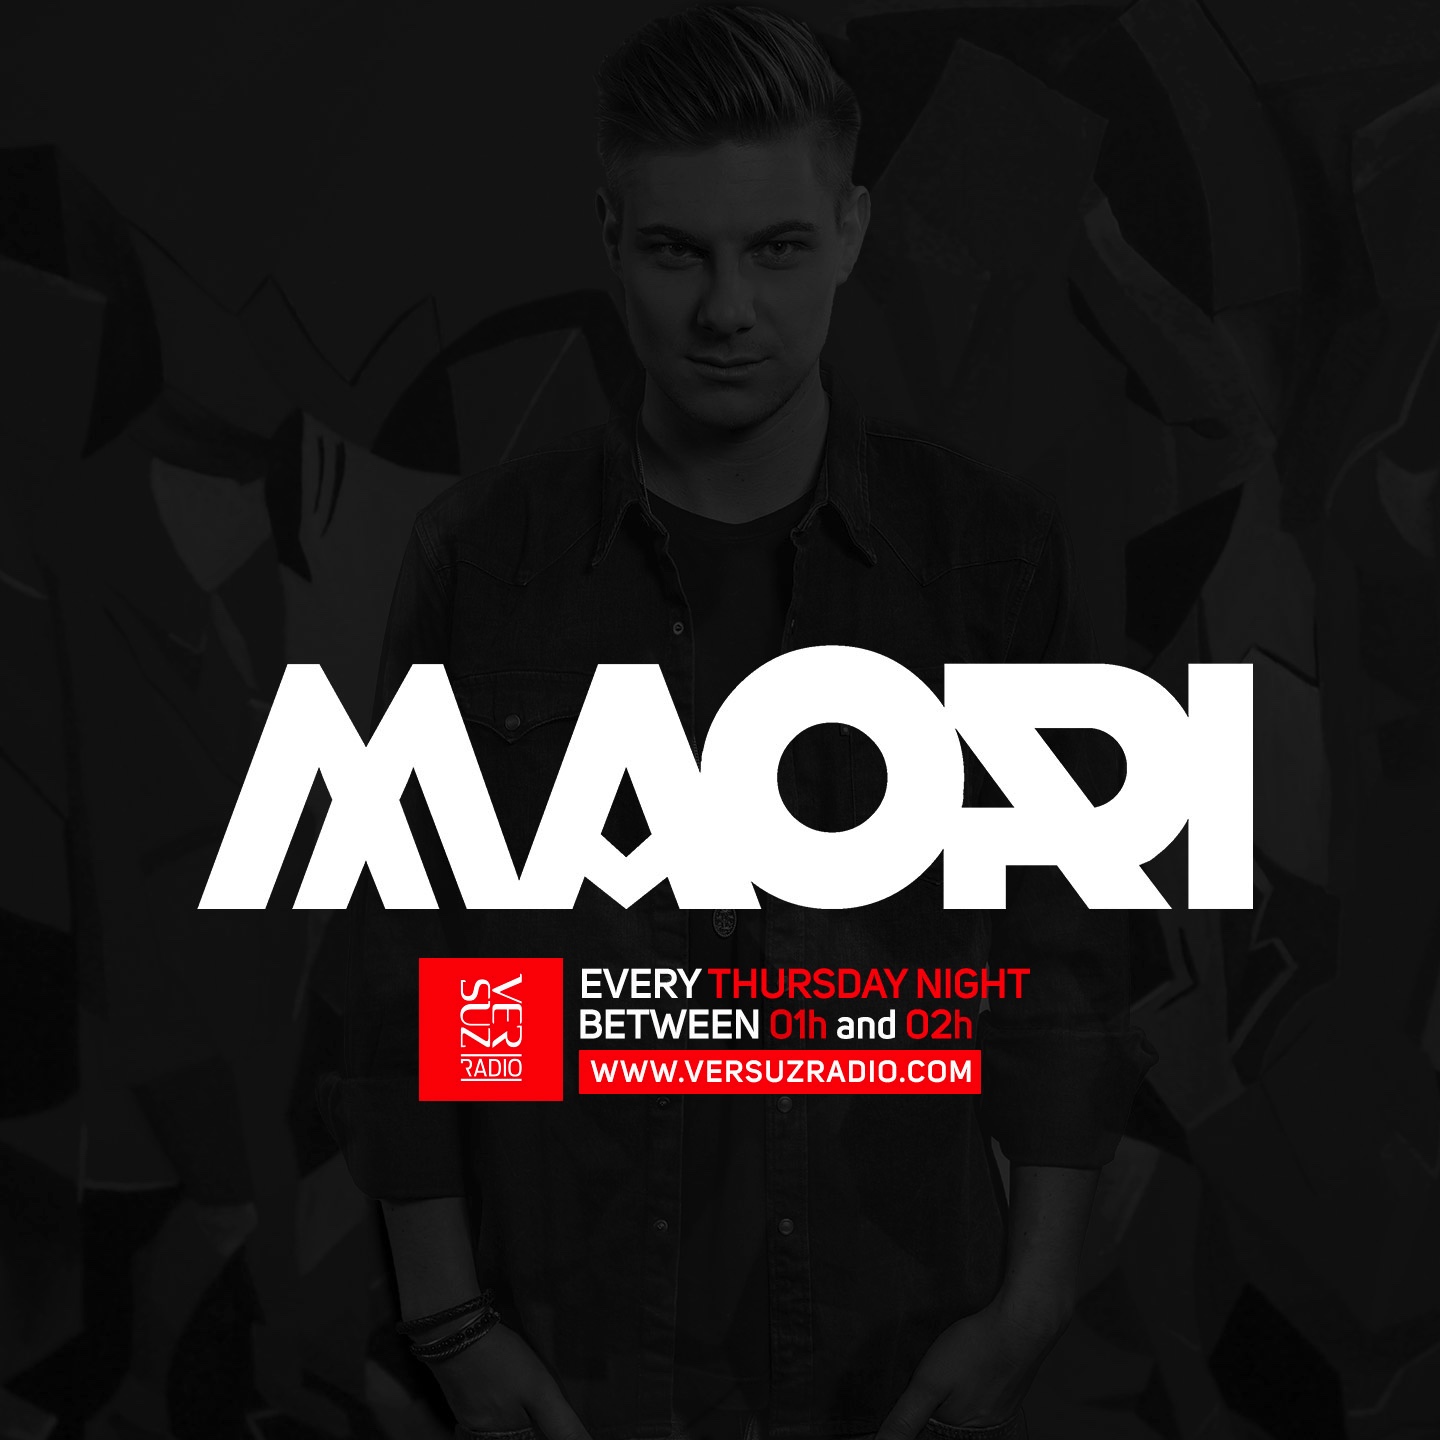 Clubhouse Radio by Maori - Episode #021